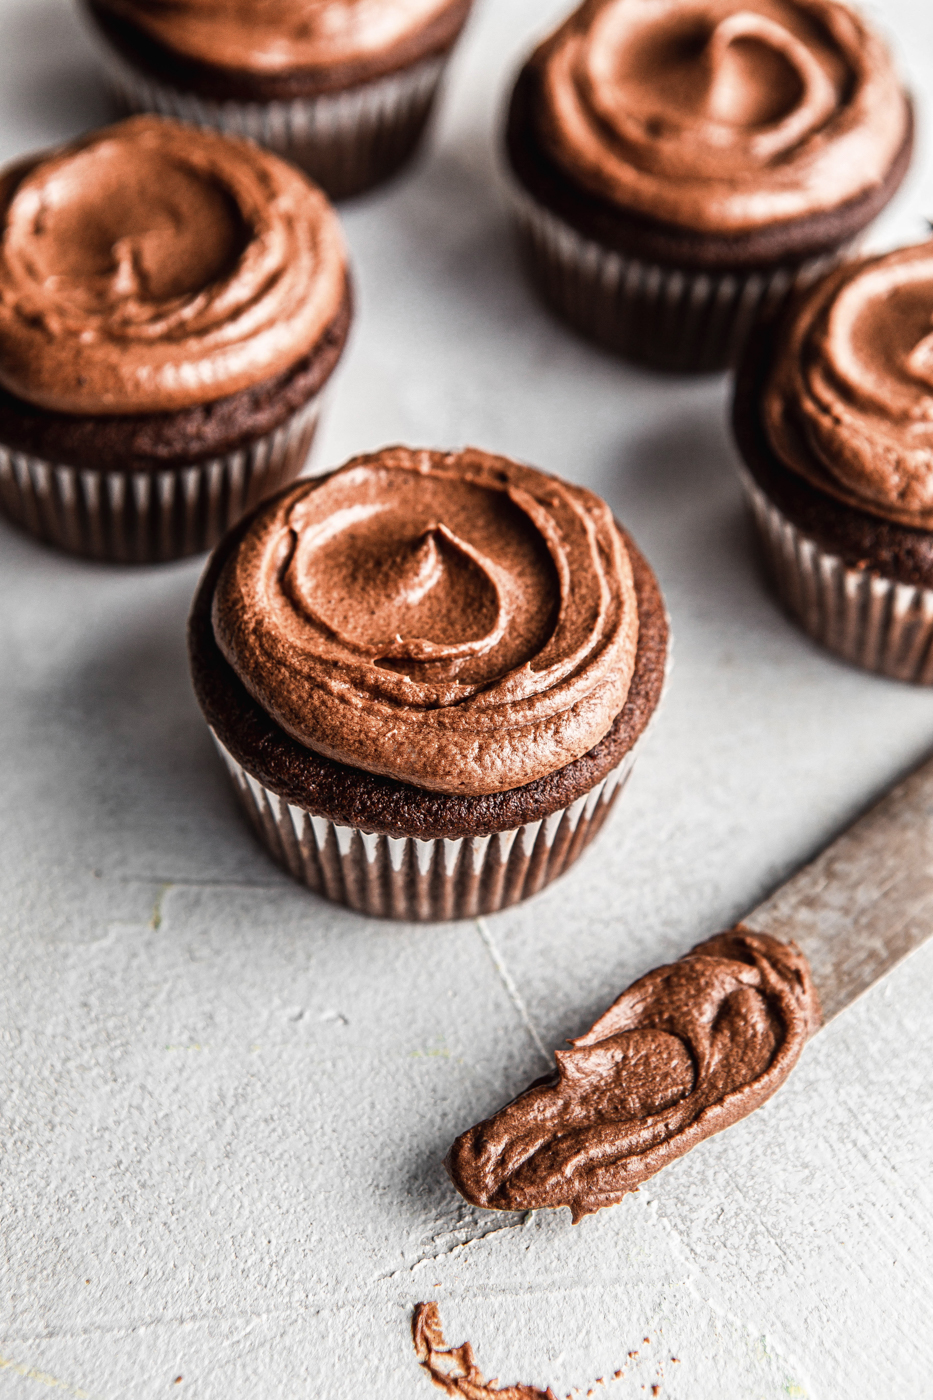 keto gluten free chocolate cupcakes with chocolate frosting